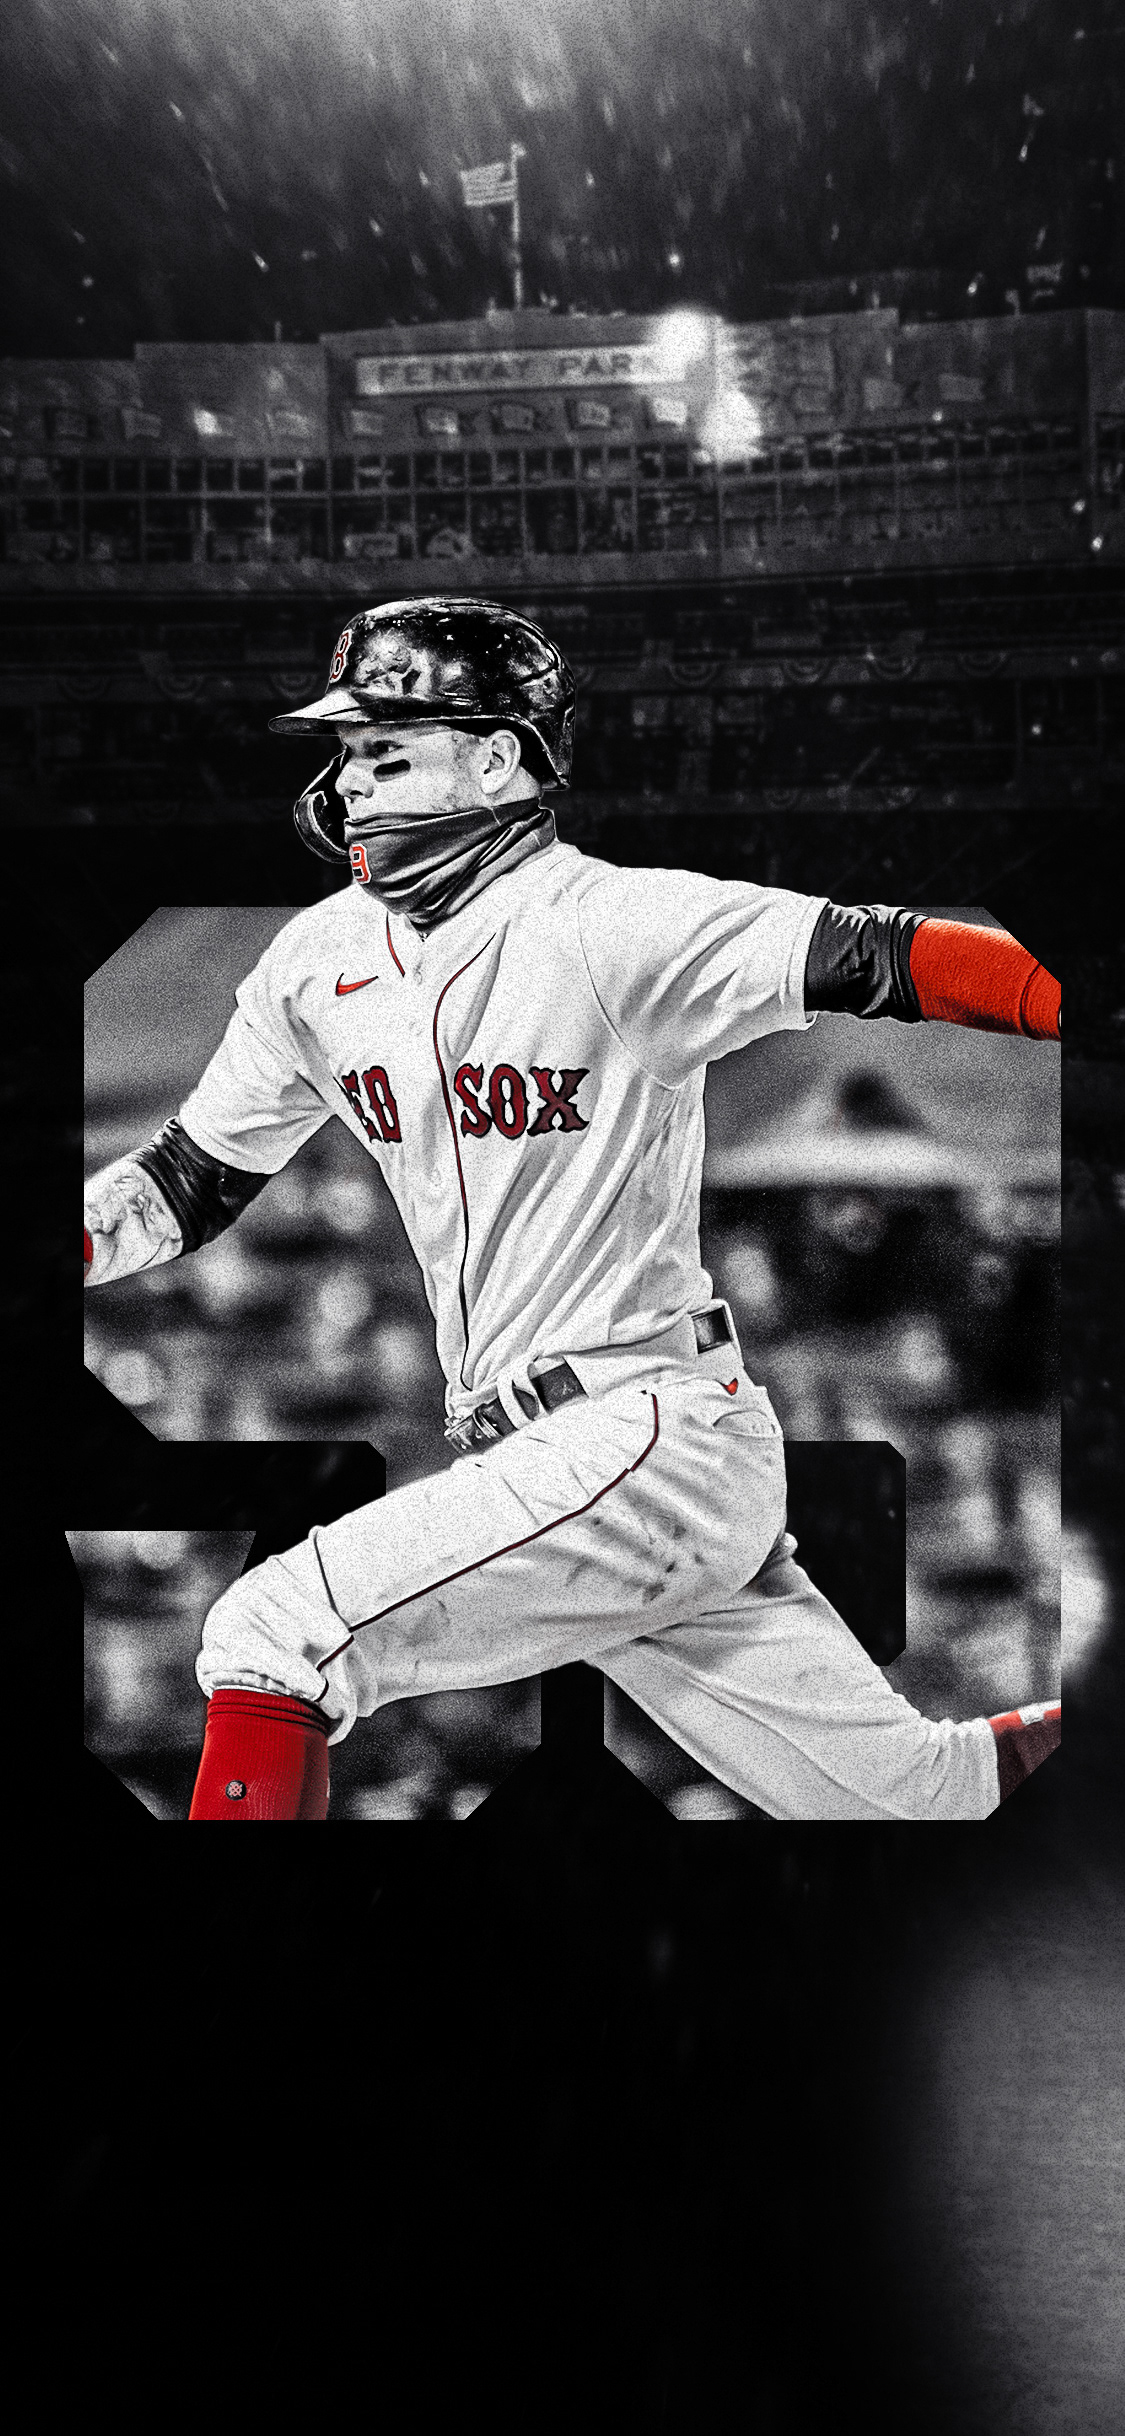 Red Sox 2021 Wallpapers